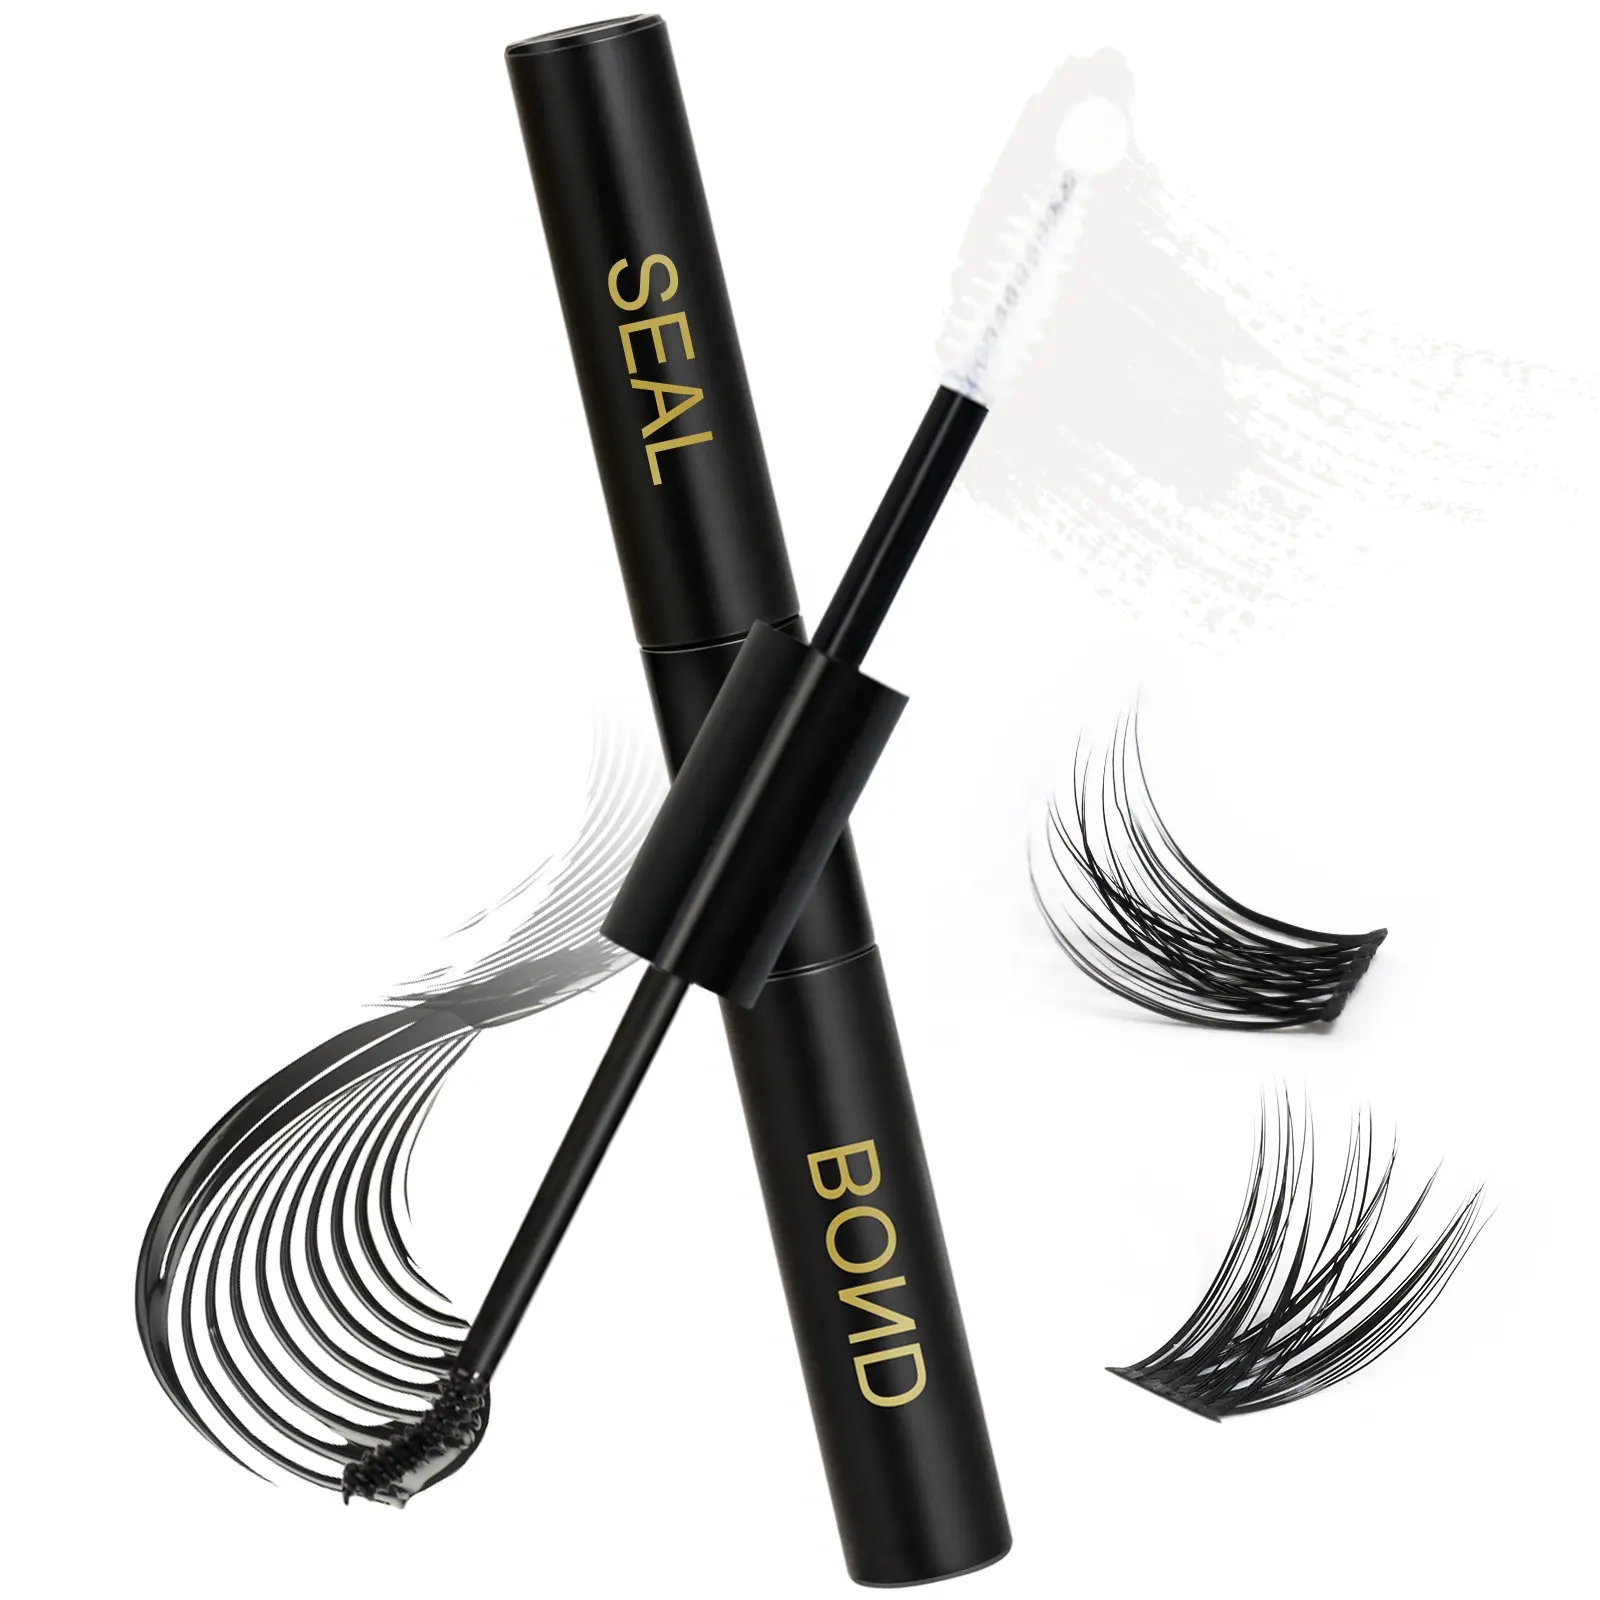 Diy lash extension glue Long listing Easy to use Double headed design Safe and gentle formula